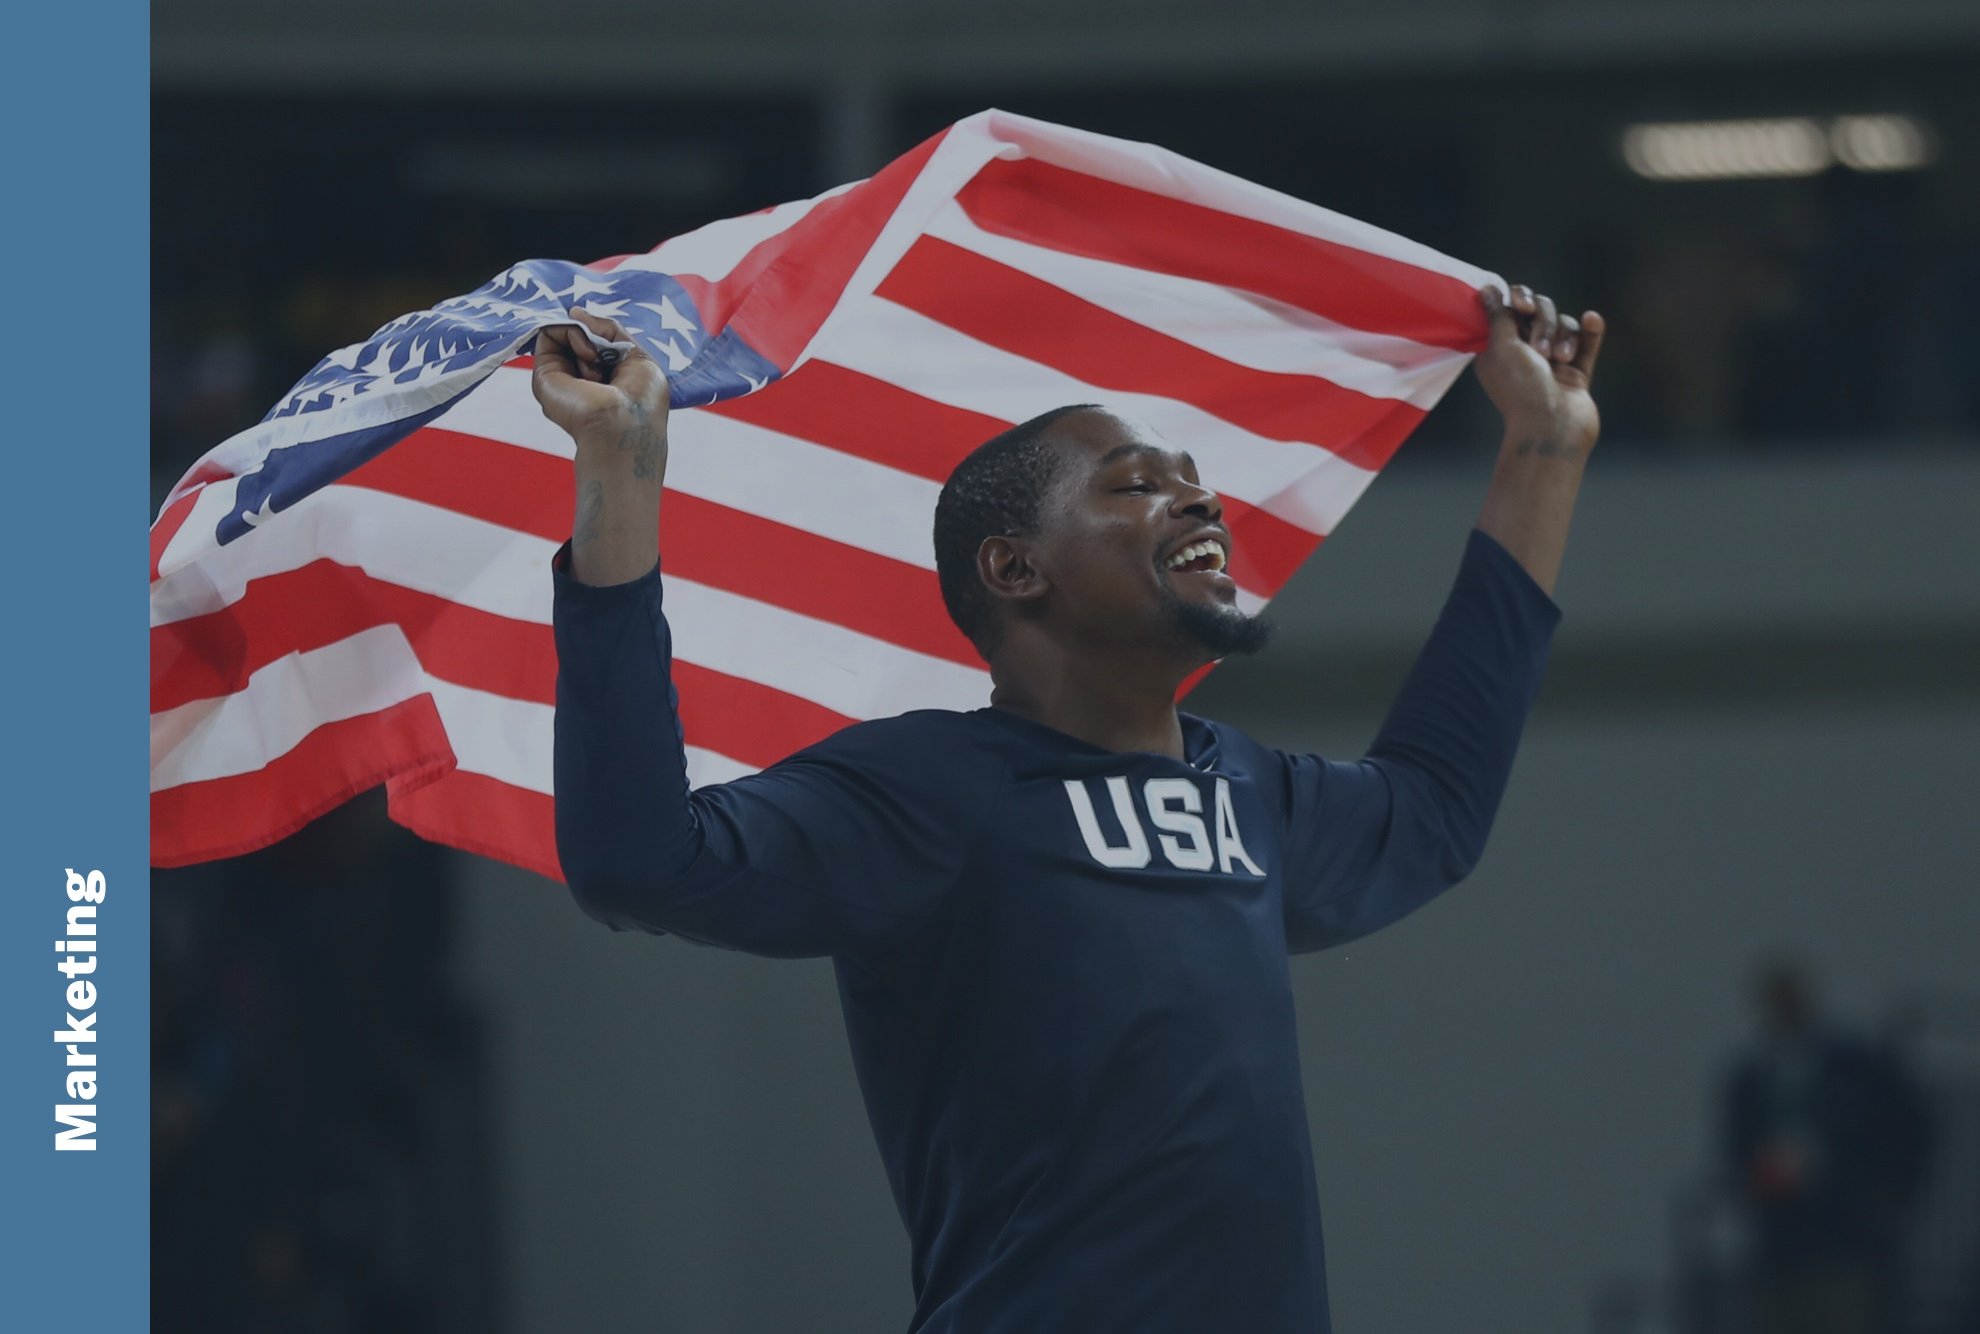 Marketing: A USA Basketball team member hoists an American flag over his head in celebration.